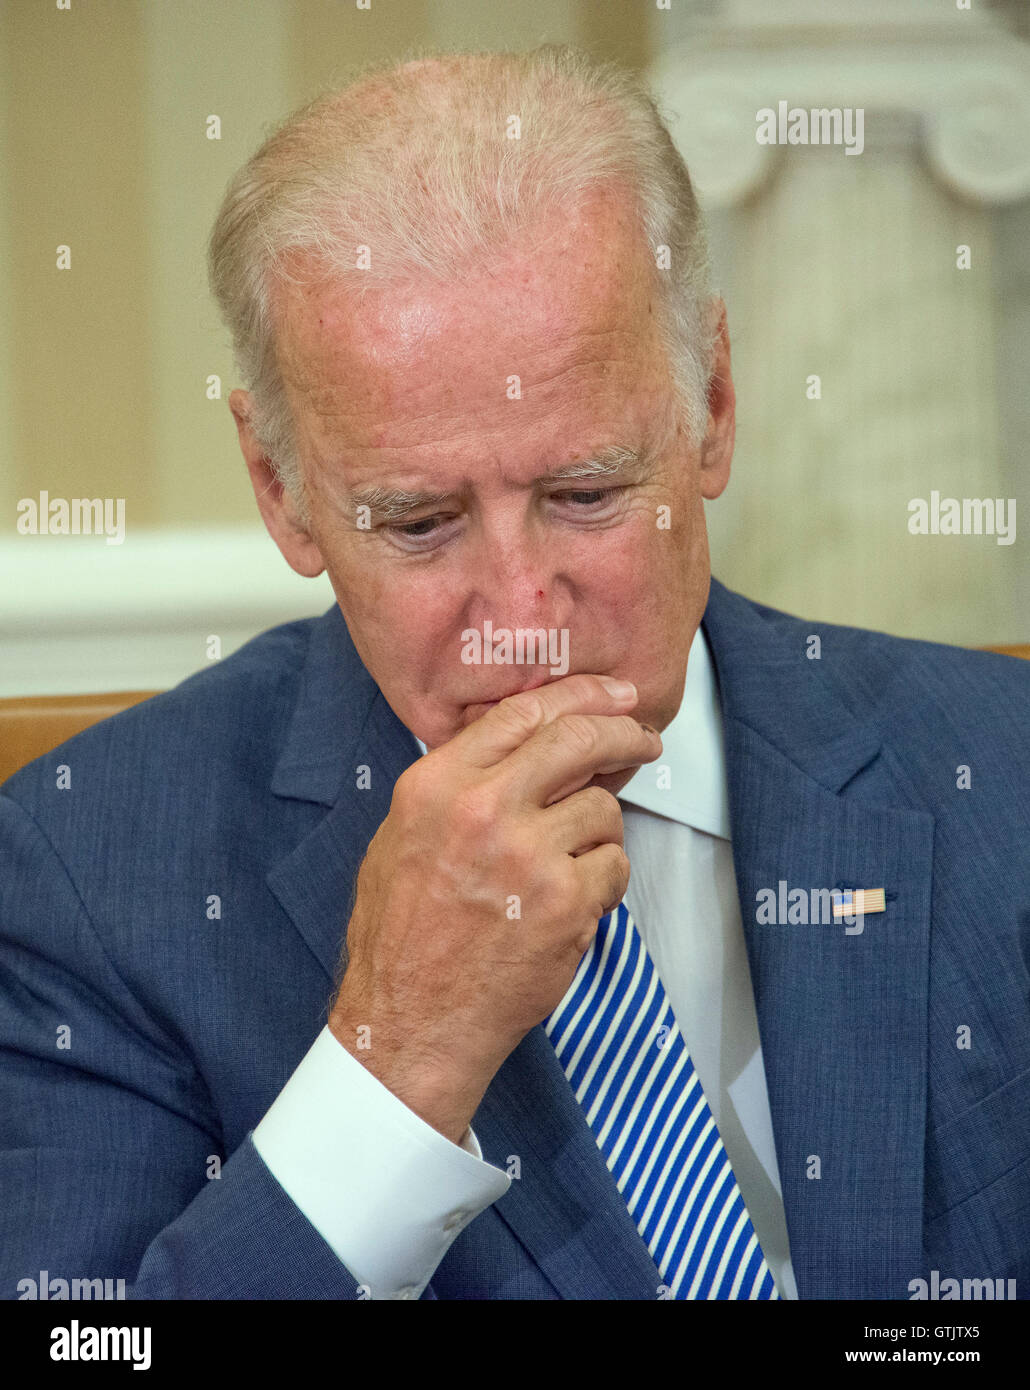 United States Vice President Joe Biden listens as US President Barack Obama makes remarks to the media after receiving an update on the investigation into the attack in Orlando, Florida in the Oval Office of the White House in Washington, DC on Monday, Ju Stock Photo